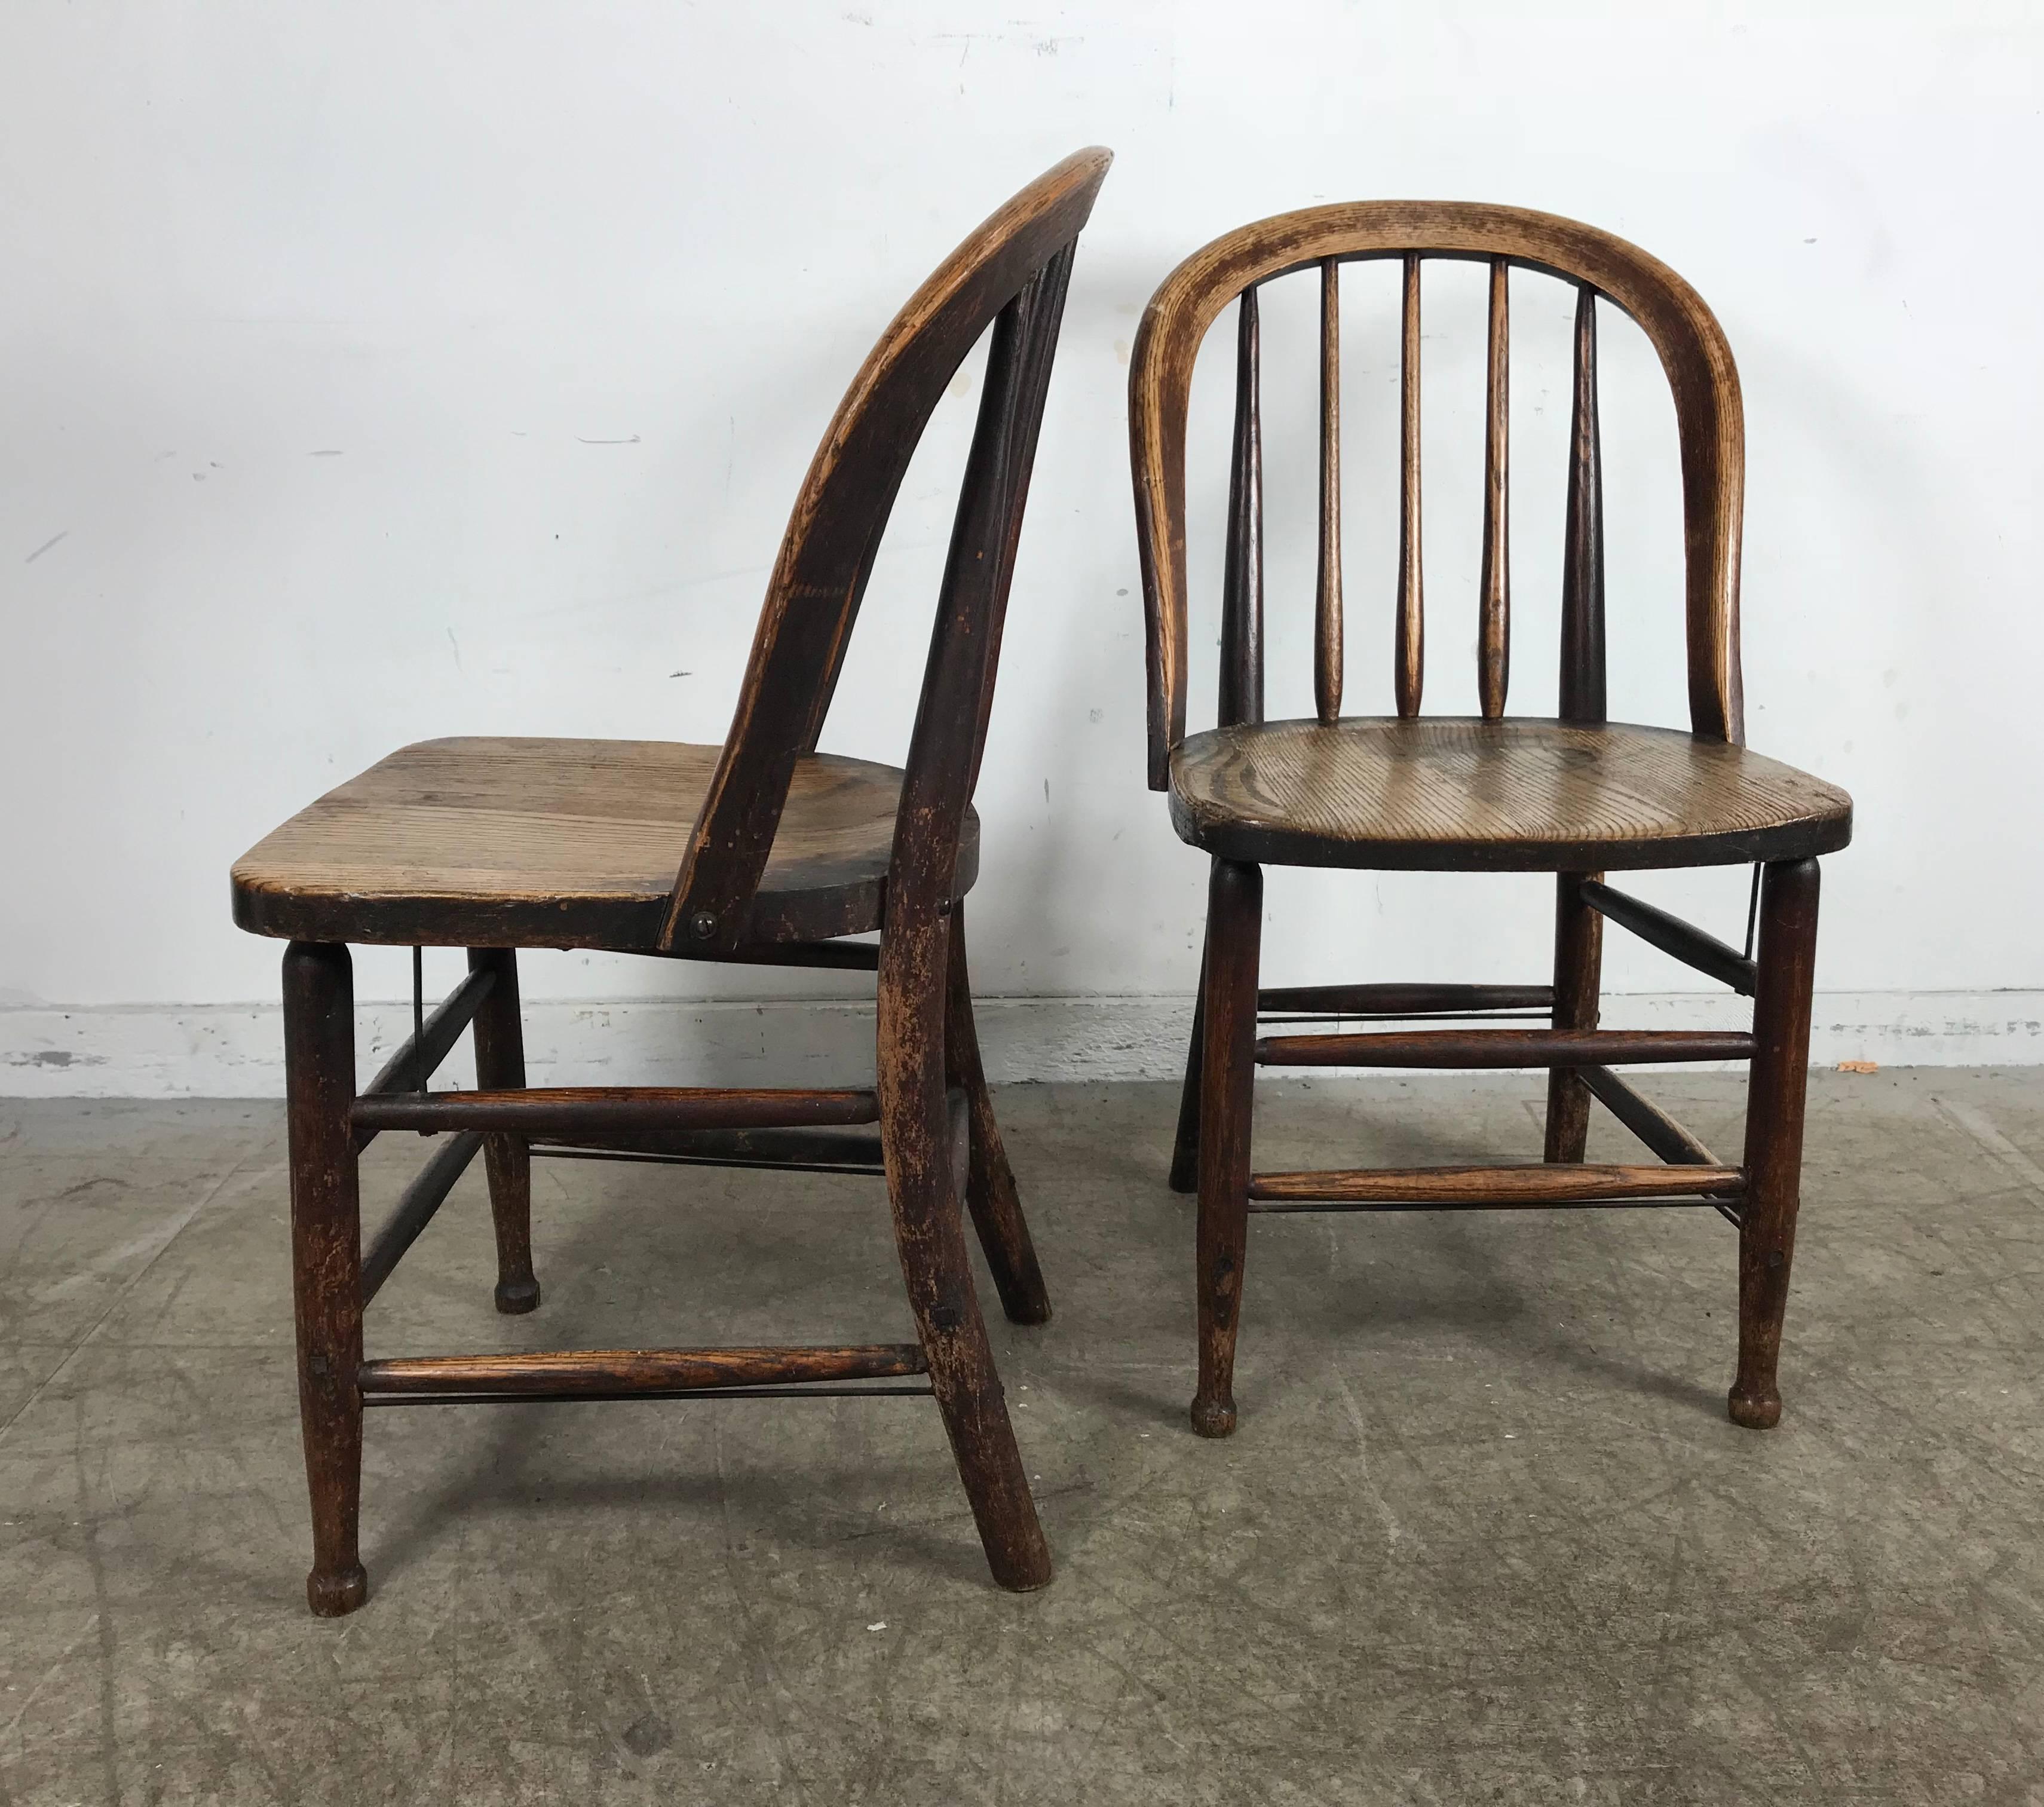 Early 20th Century Pair of Early Oak Antique Industrial Side Chairs by Heywood Wakefield